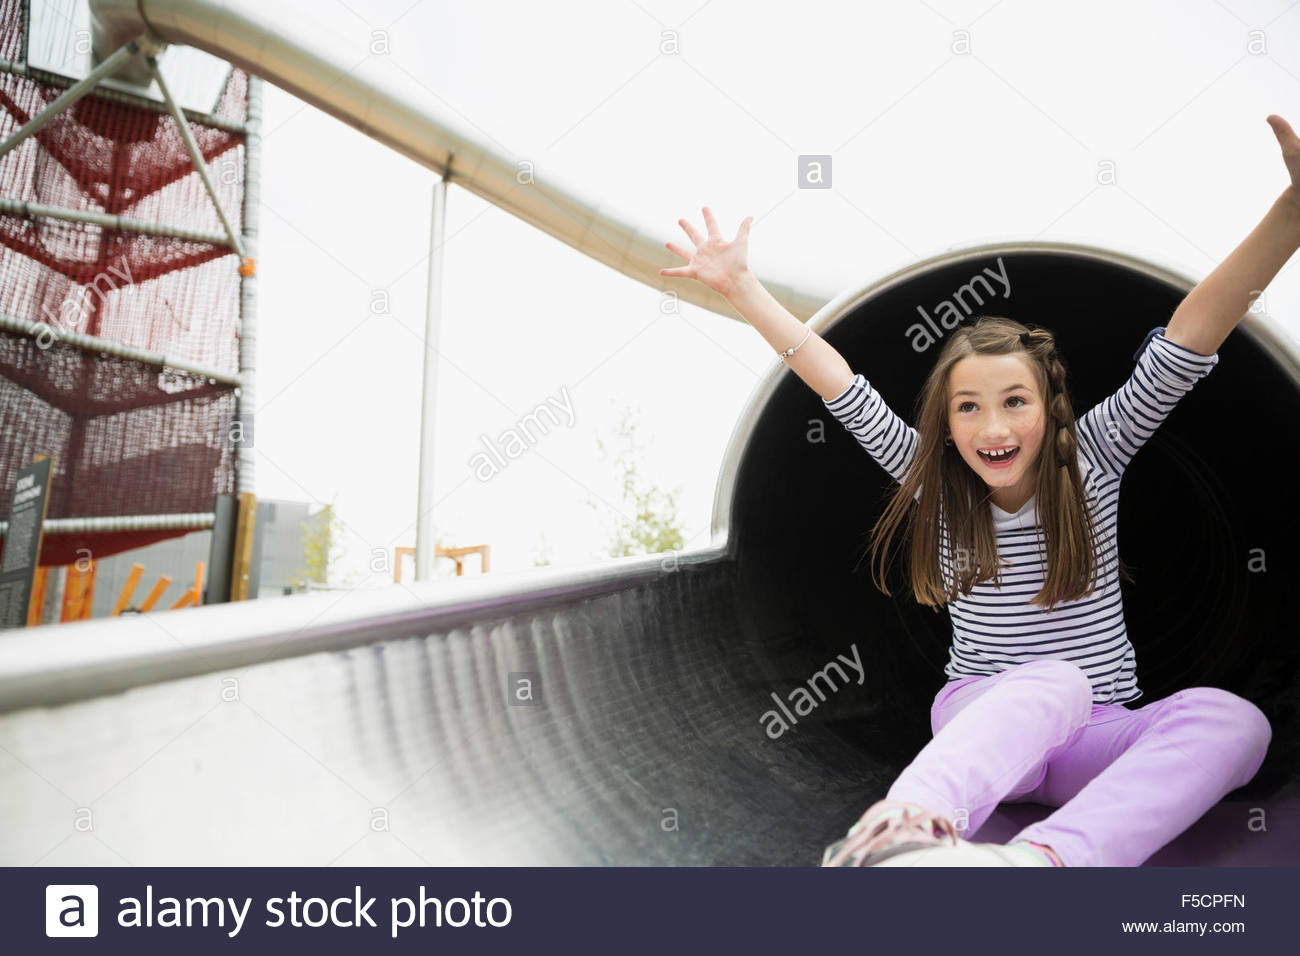 Playful girl sliding out slide tunnel at playground Stock Photo